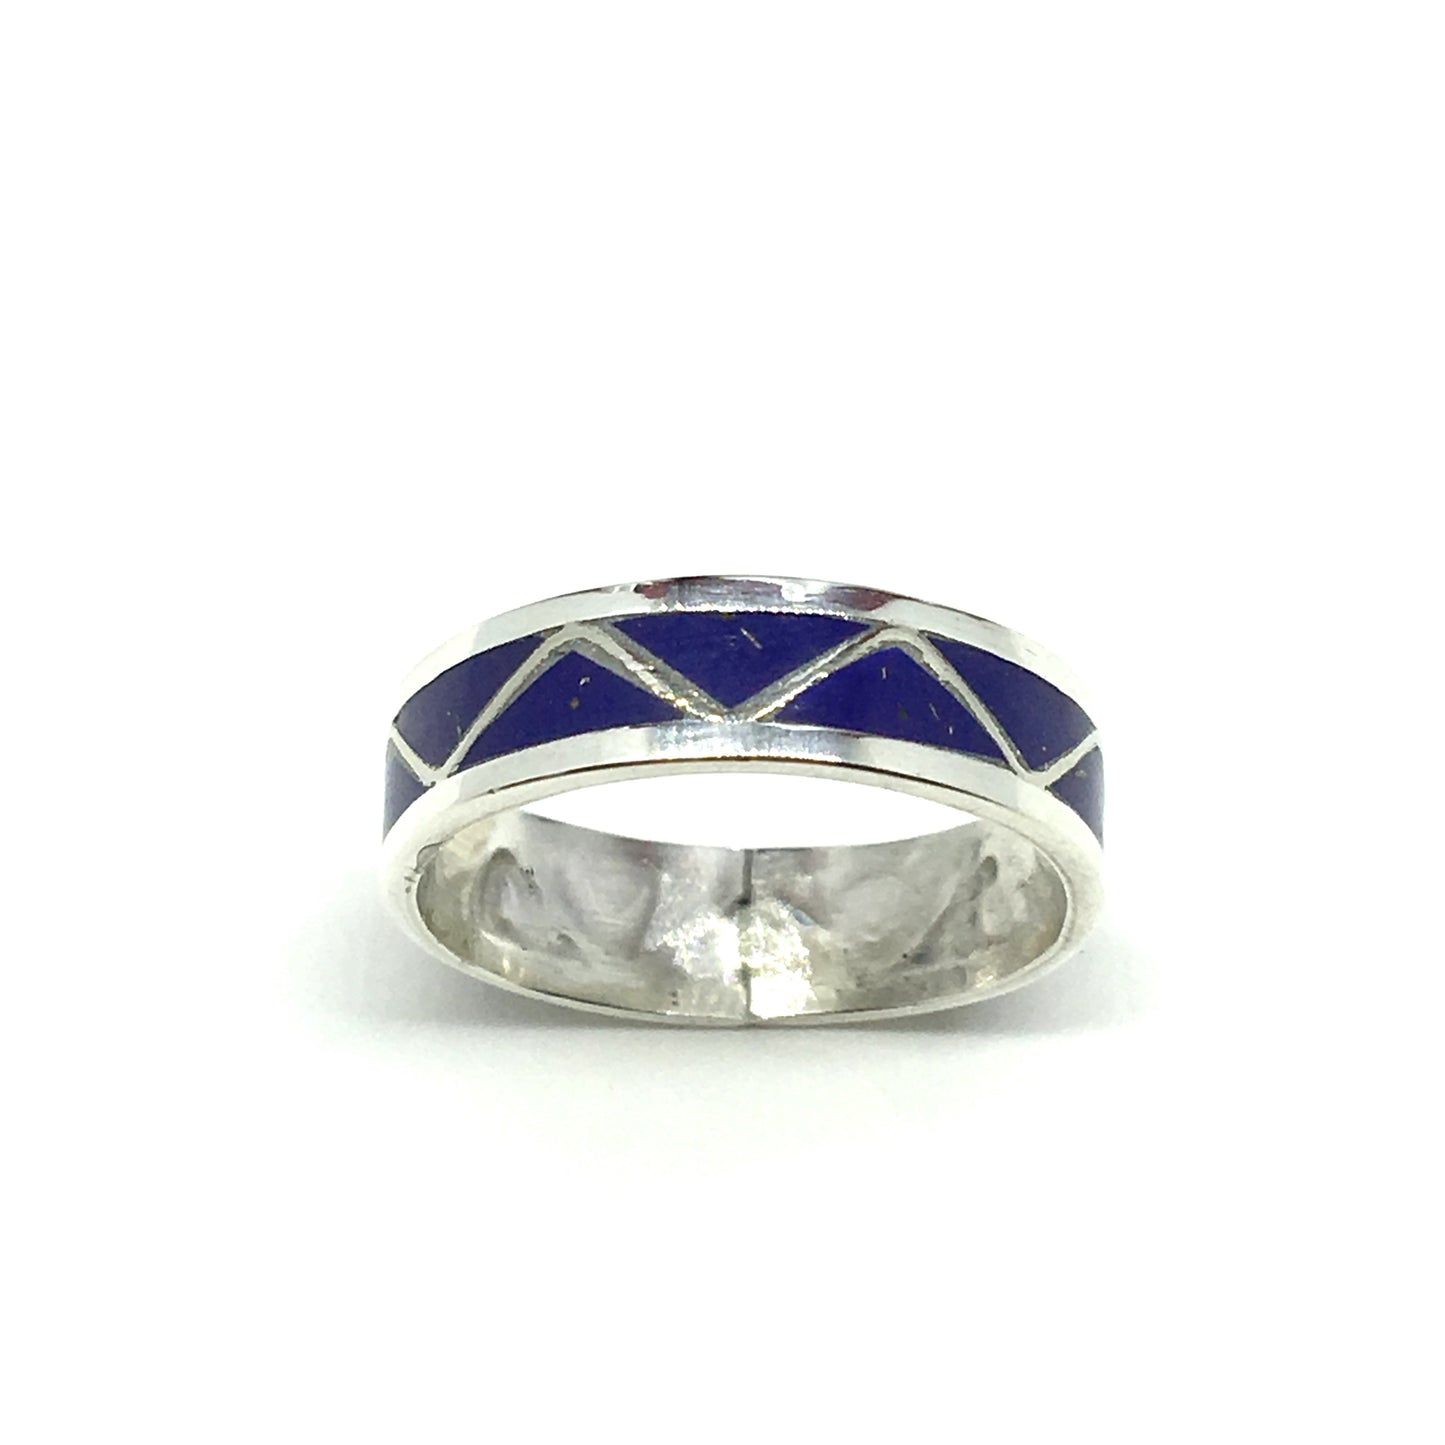 Jewelry Ring | Used Sterling Silver Lapis Blue Triangle Design Pattern Band Ring sz7 